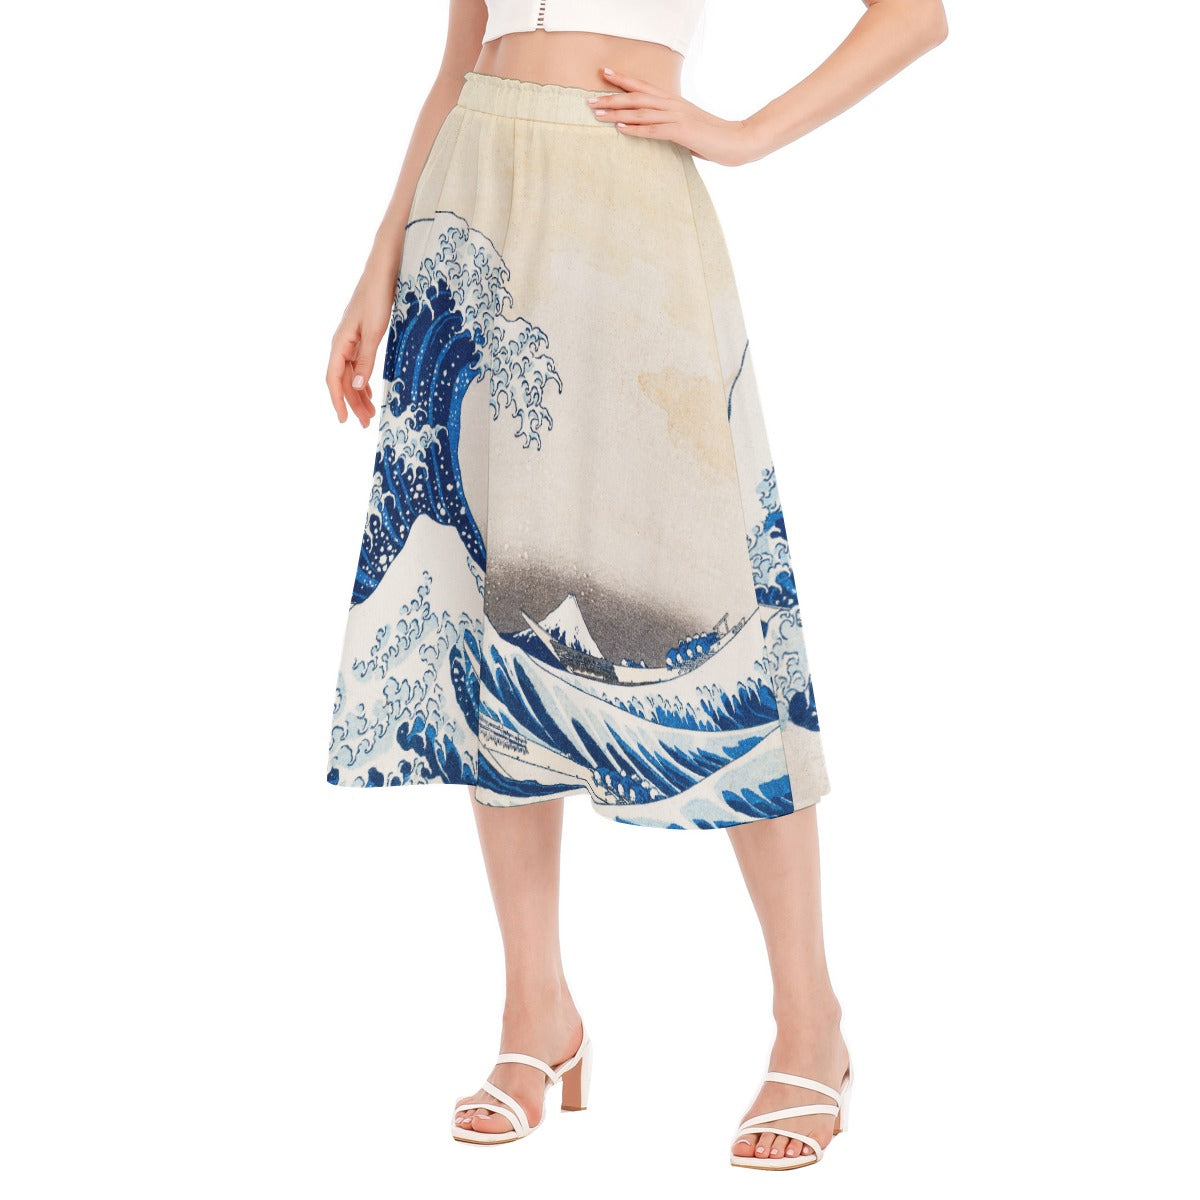 Wave-inspired fashion for ocean lovers